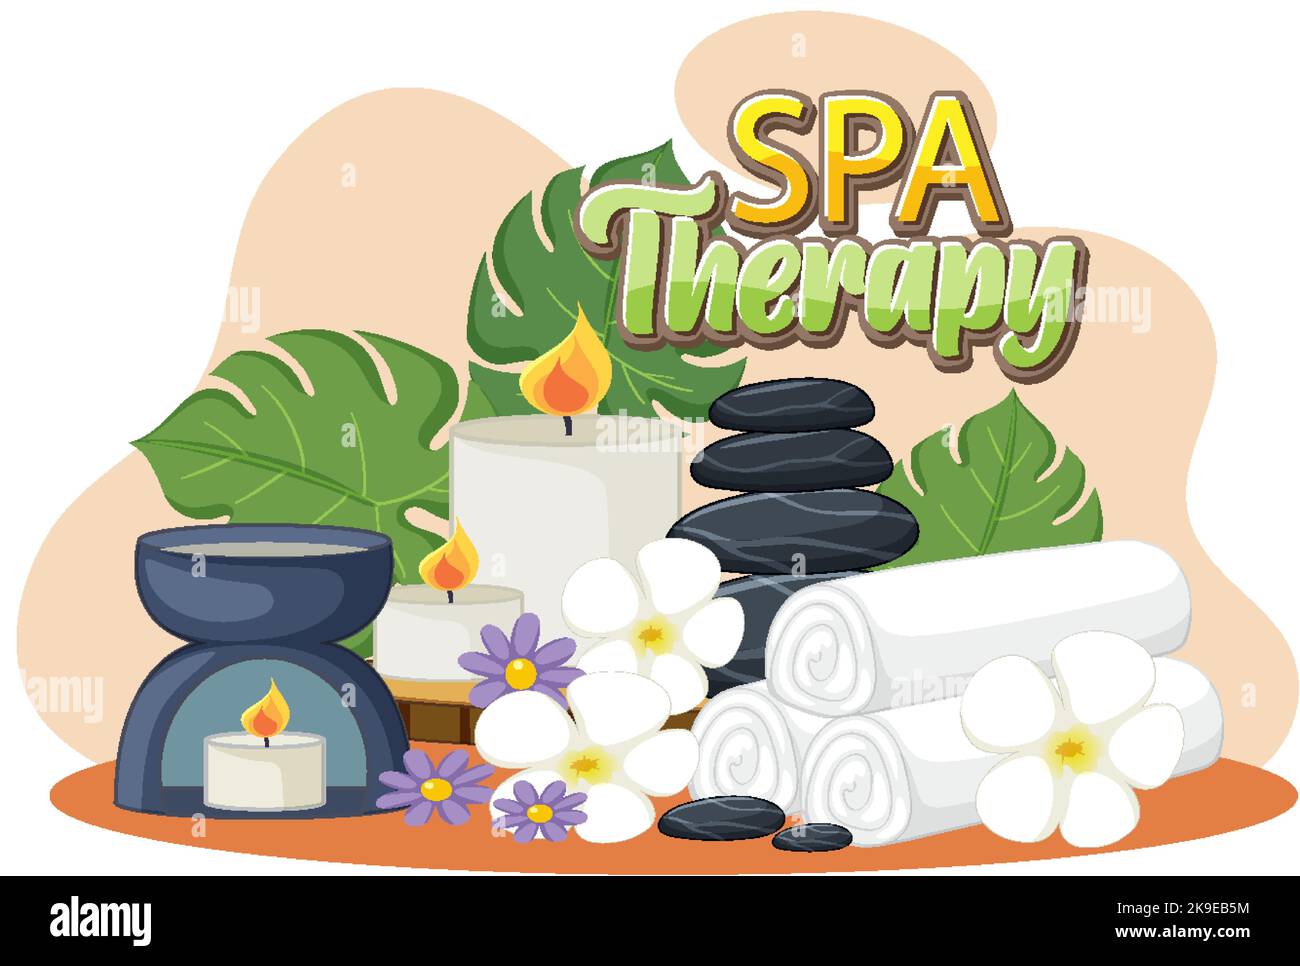 Spa therapy text with spa objects illustration Stock Vector